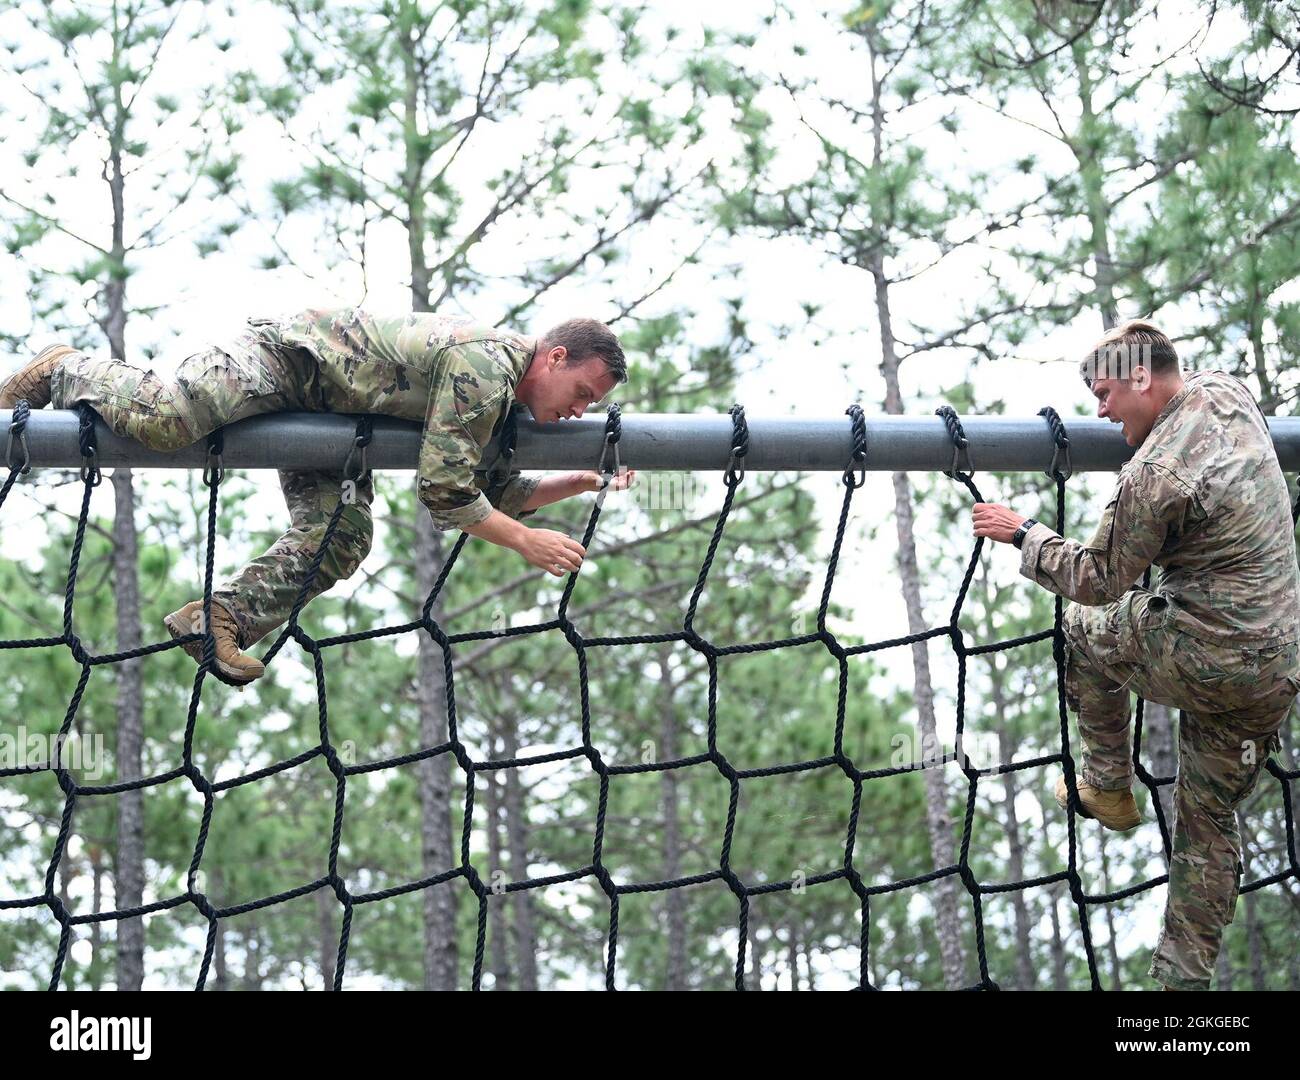 Soldiers from Support Battalion, 1st Special Warfare Training Group (Airborne) climb a cargo net during the battalion's Commander's Cup competition at Fort Bragg, North Carolina April 15, 2021. The Soldiers from each company competed in a ruck march, obstacle course, land navigation, Jeopardy-themed trivia contest and stress shoot with pistols and rifles. Stock Photo